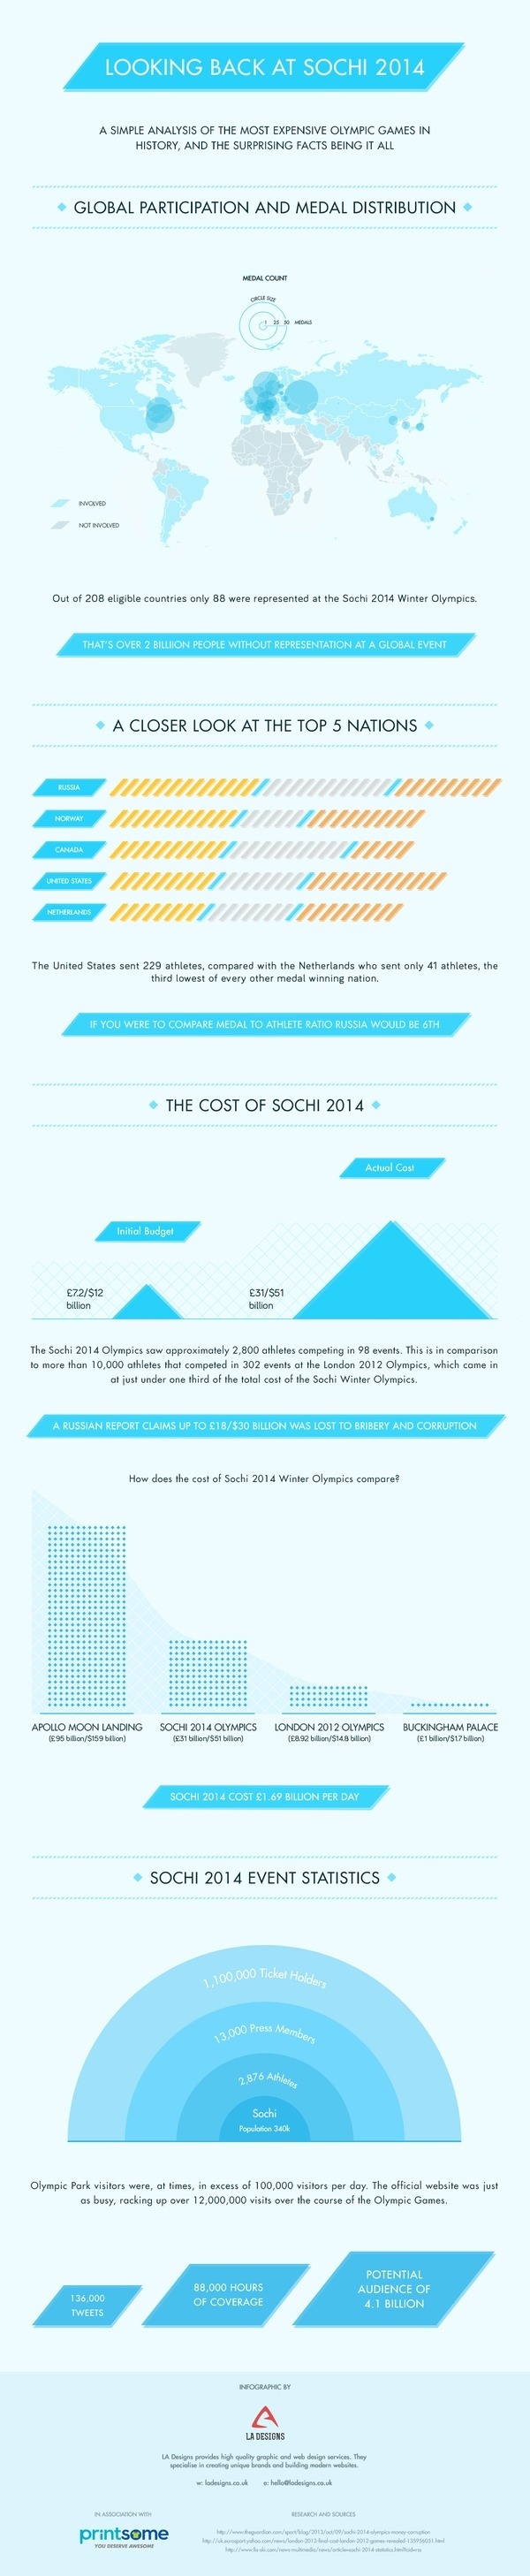 Sochi 2014 Infographic: Breaking Down the Biggest Olympics #infographic #design #graphic #sochi #olympics